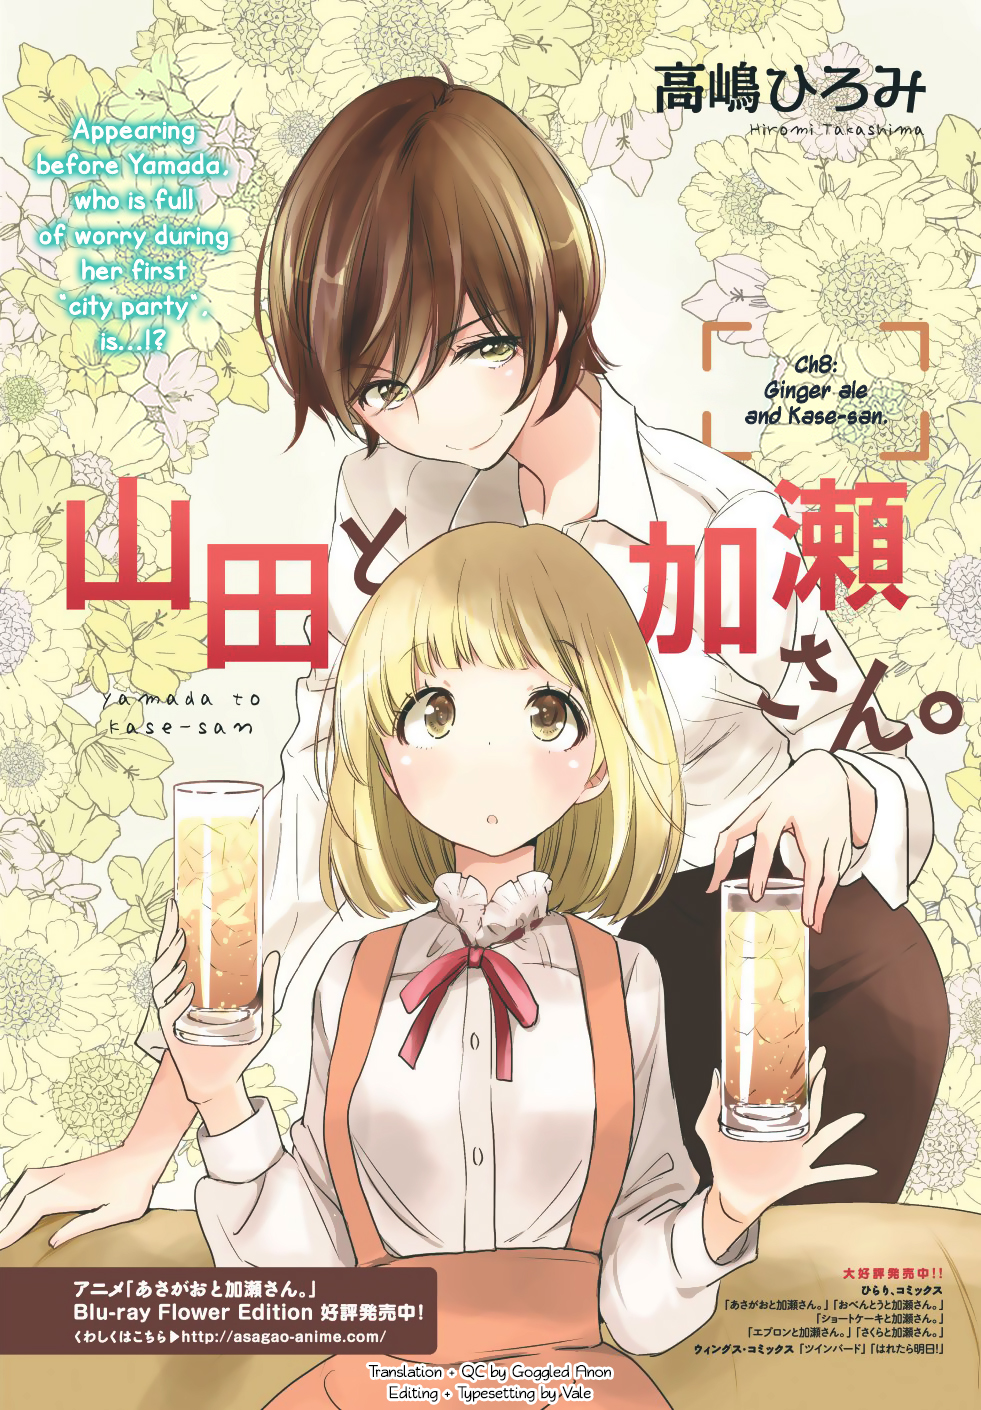 Yamada To Kase-San Chapter 8: Ginger Ale And Kase-San - Picture 3